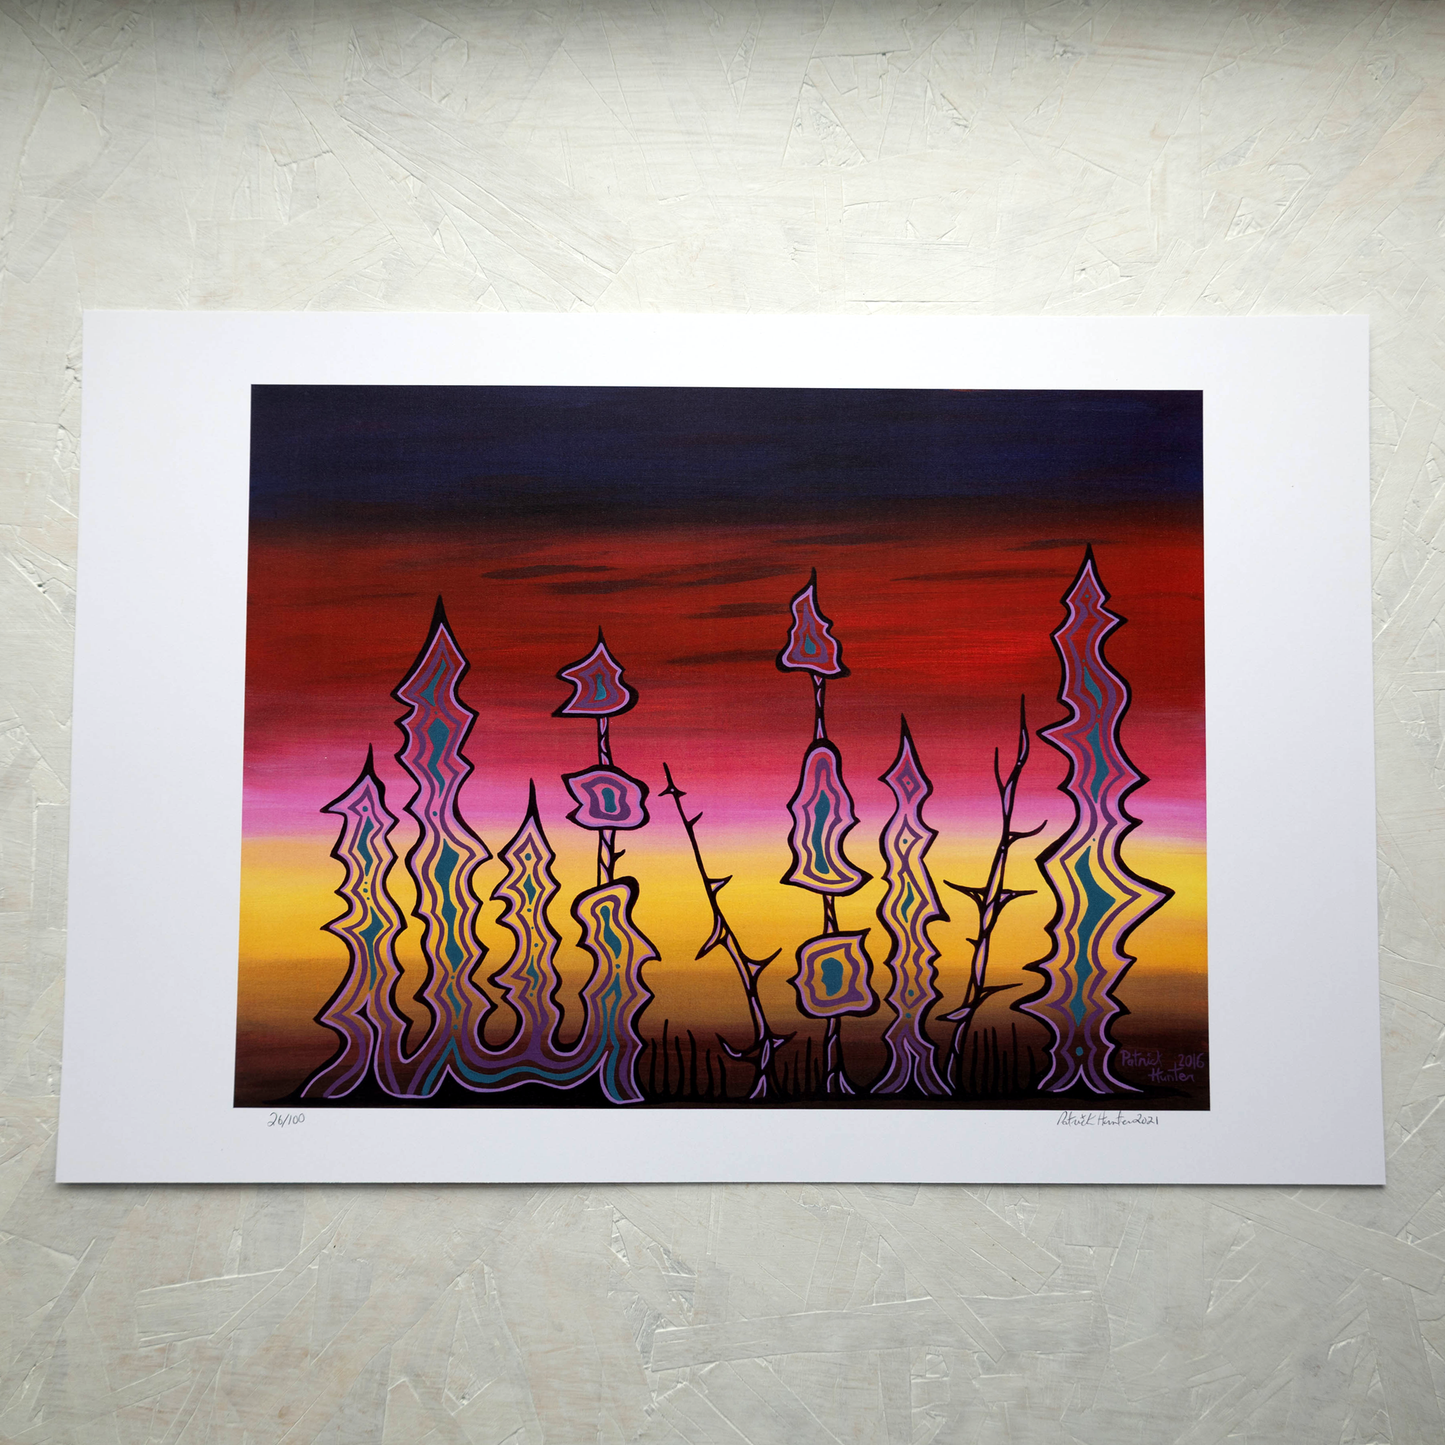 Print of Patrick Hunter's painting of forest spirits against an early morning sky, woodland art style.